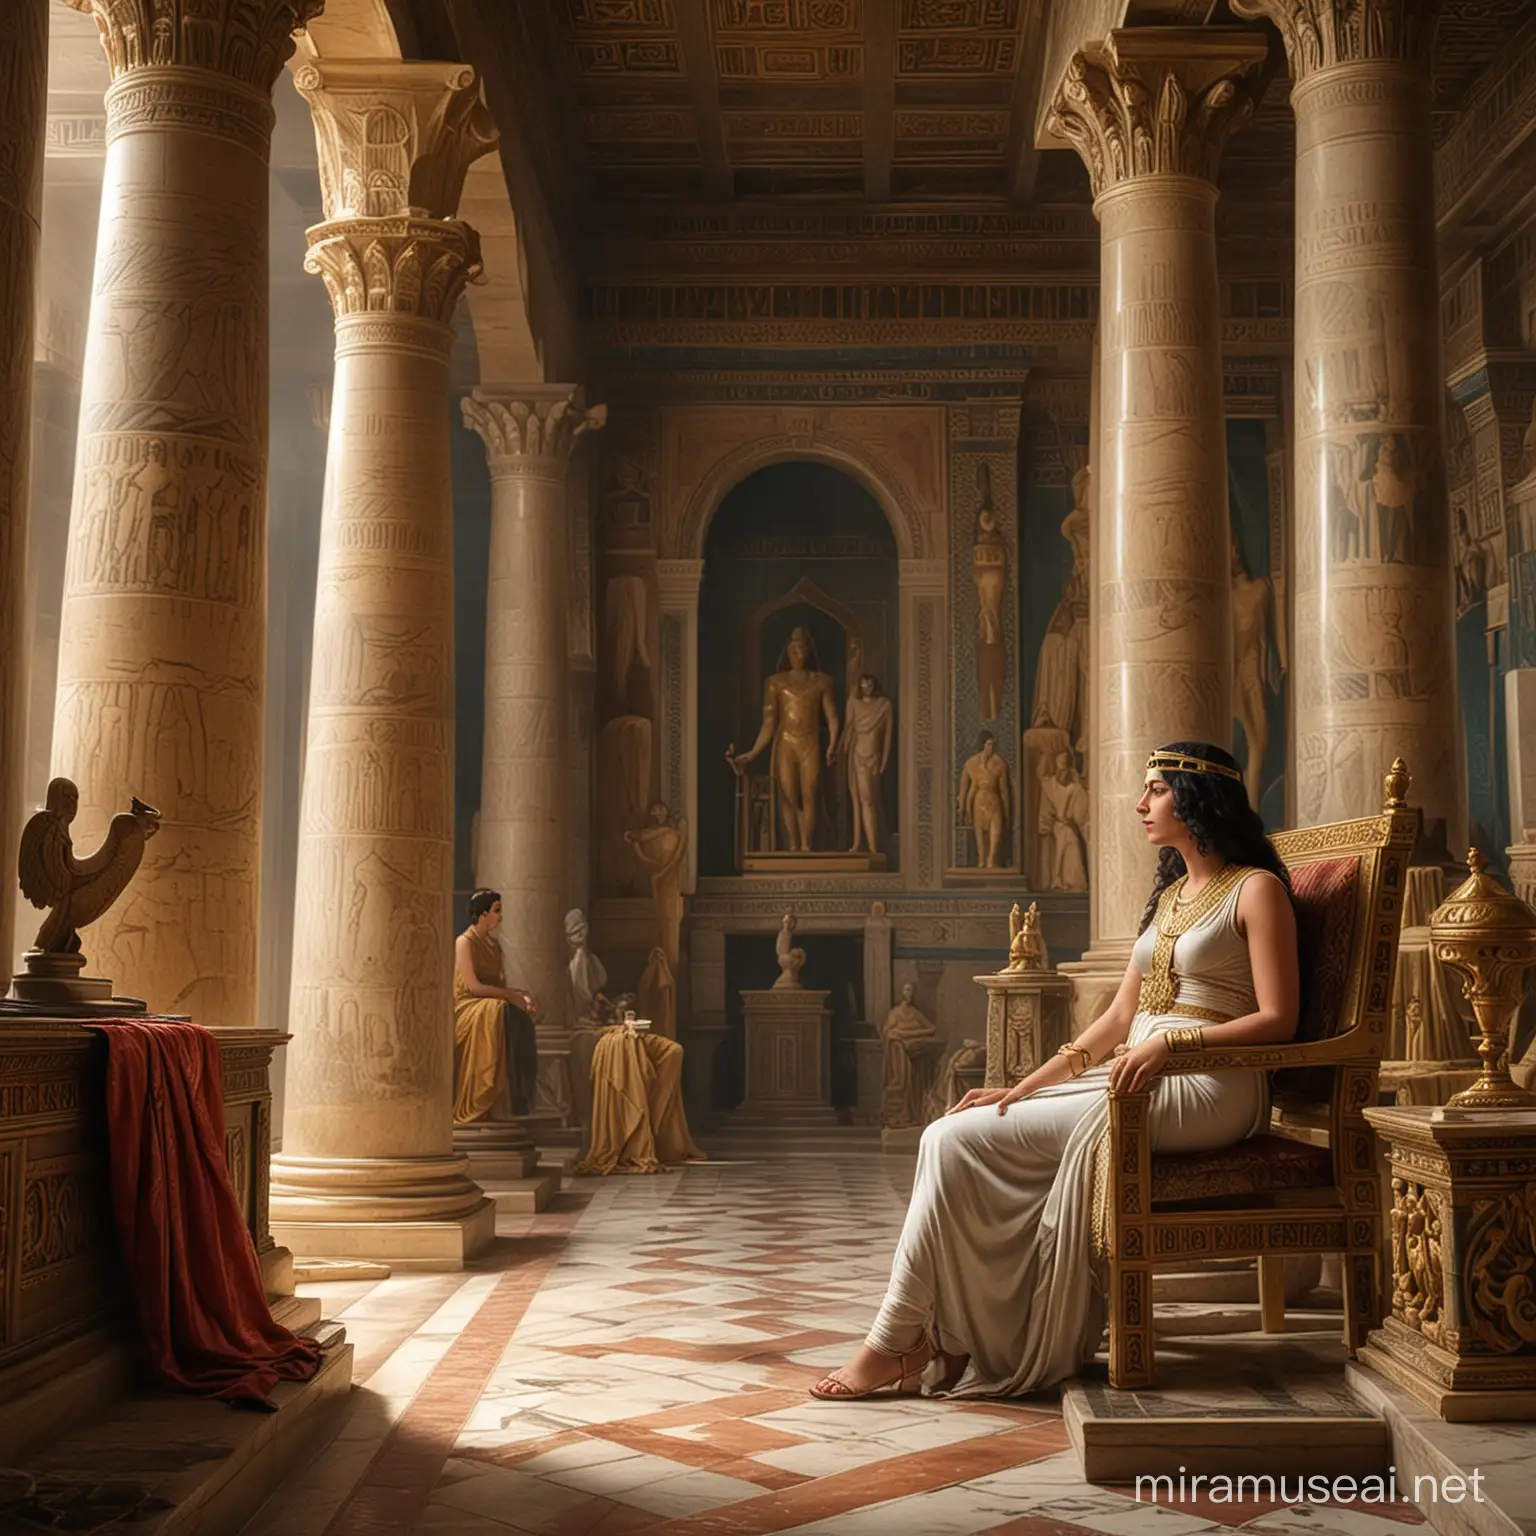 An opulent palace setting in ancient Alexandria, with Queen Cleopatra deep in thought, strategizing her next political move.